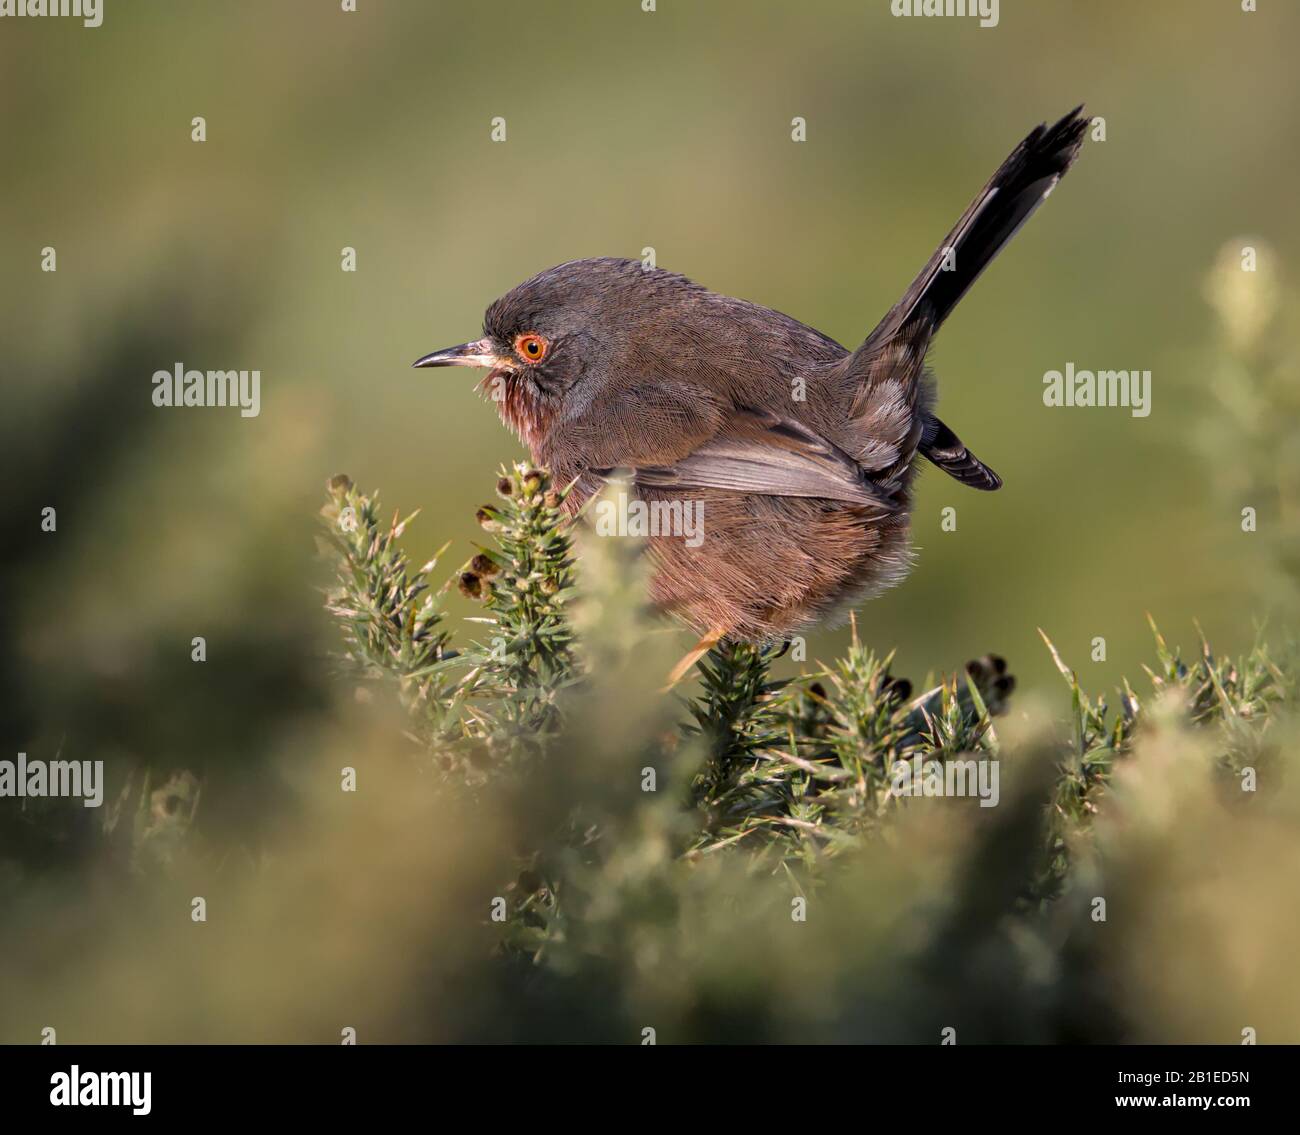 Dartford Warbler, Sylvia undata, Searching For Food In A Gorse Bush With Tail Upright, Keyhaven UK Stock Photo